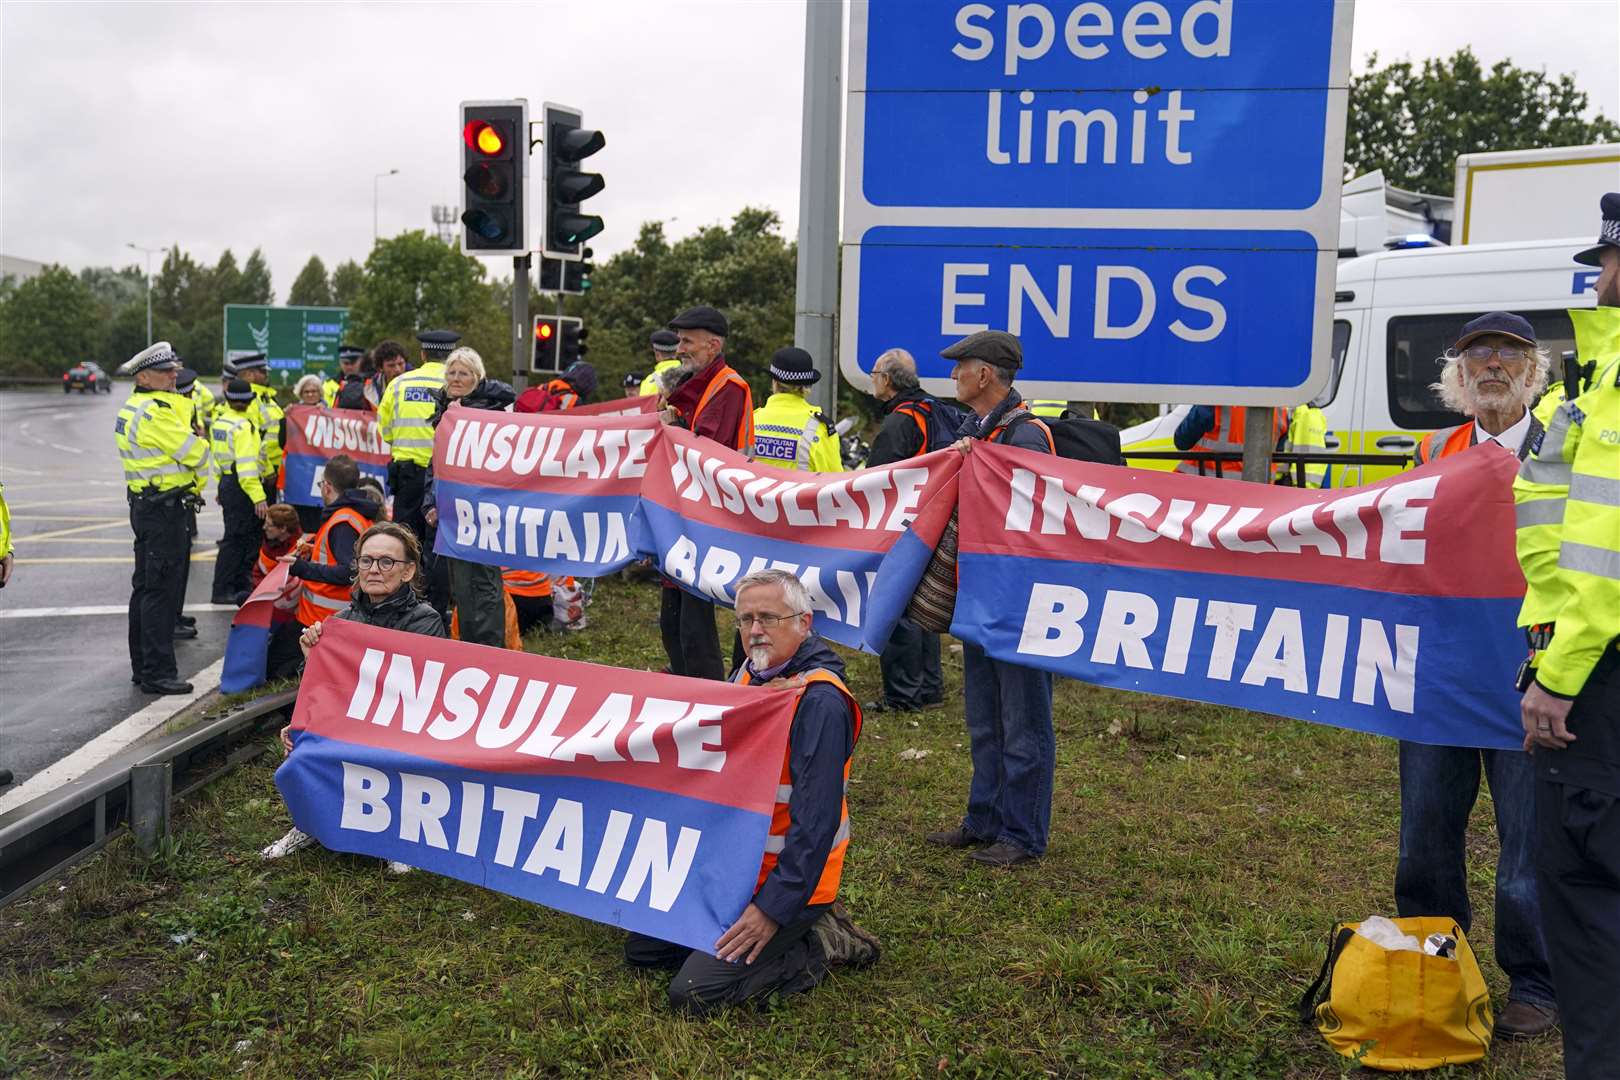 Members of Insulate Britain occupyied a roundabout leading from the M25 to Heathrow Airport in September (Steve Parsons/PA)